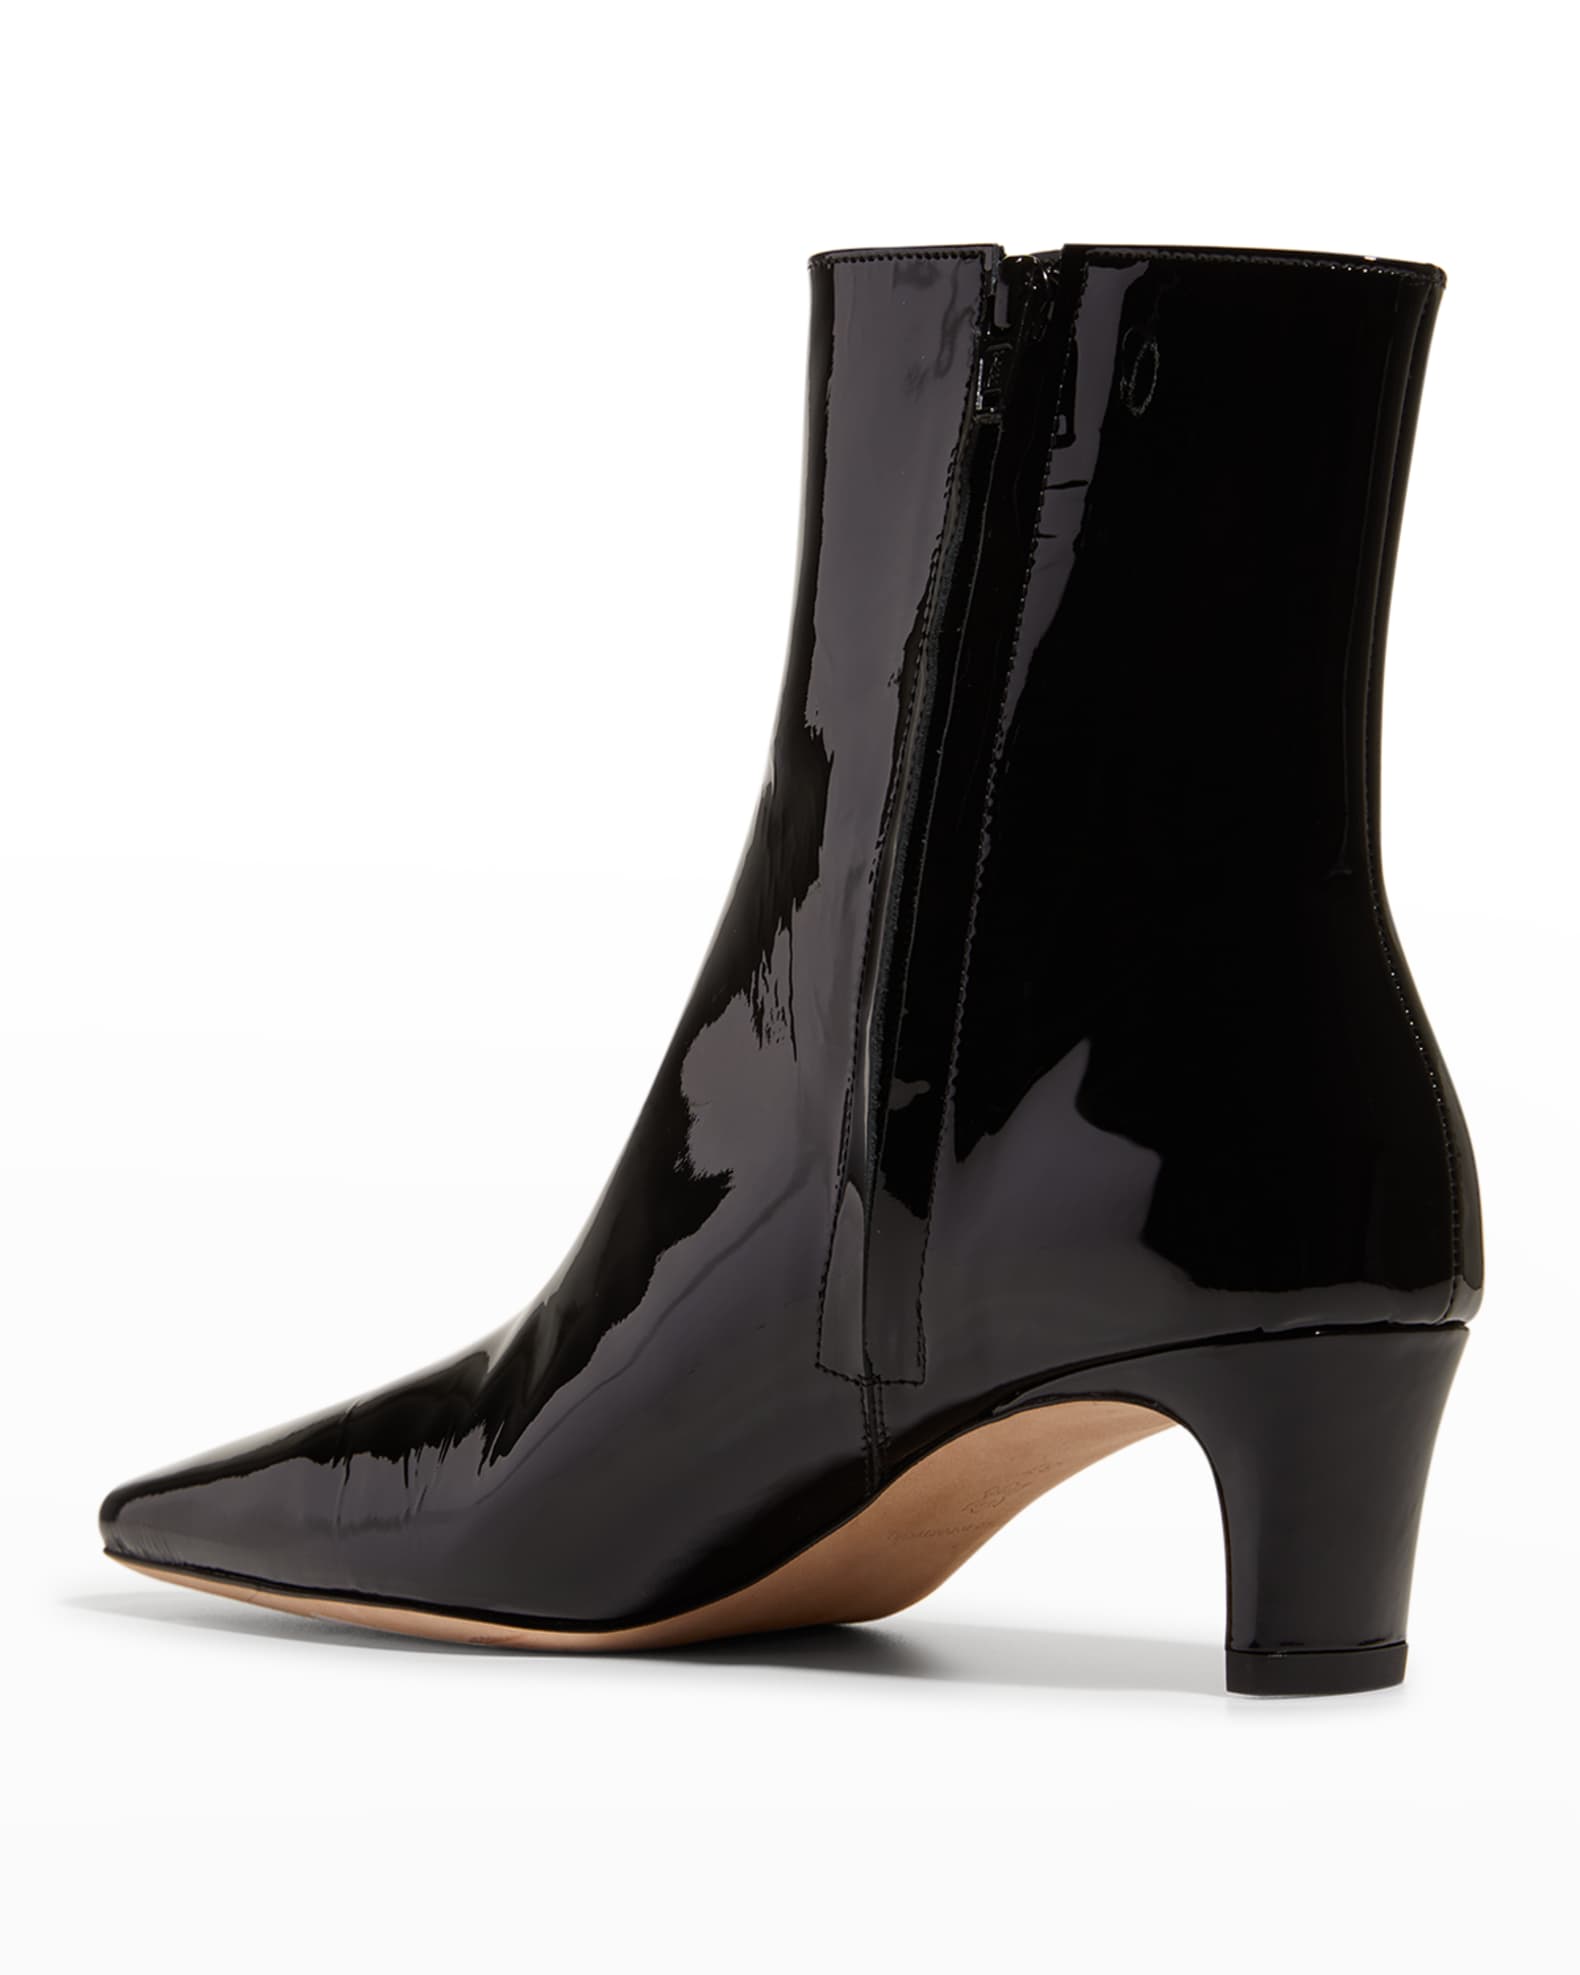 Staud Wally Leather Square-Toe Ankle Booties | Neiman Marcus